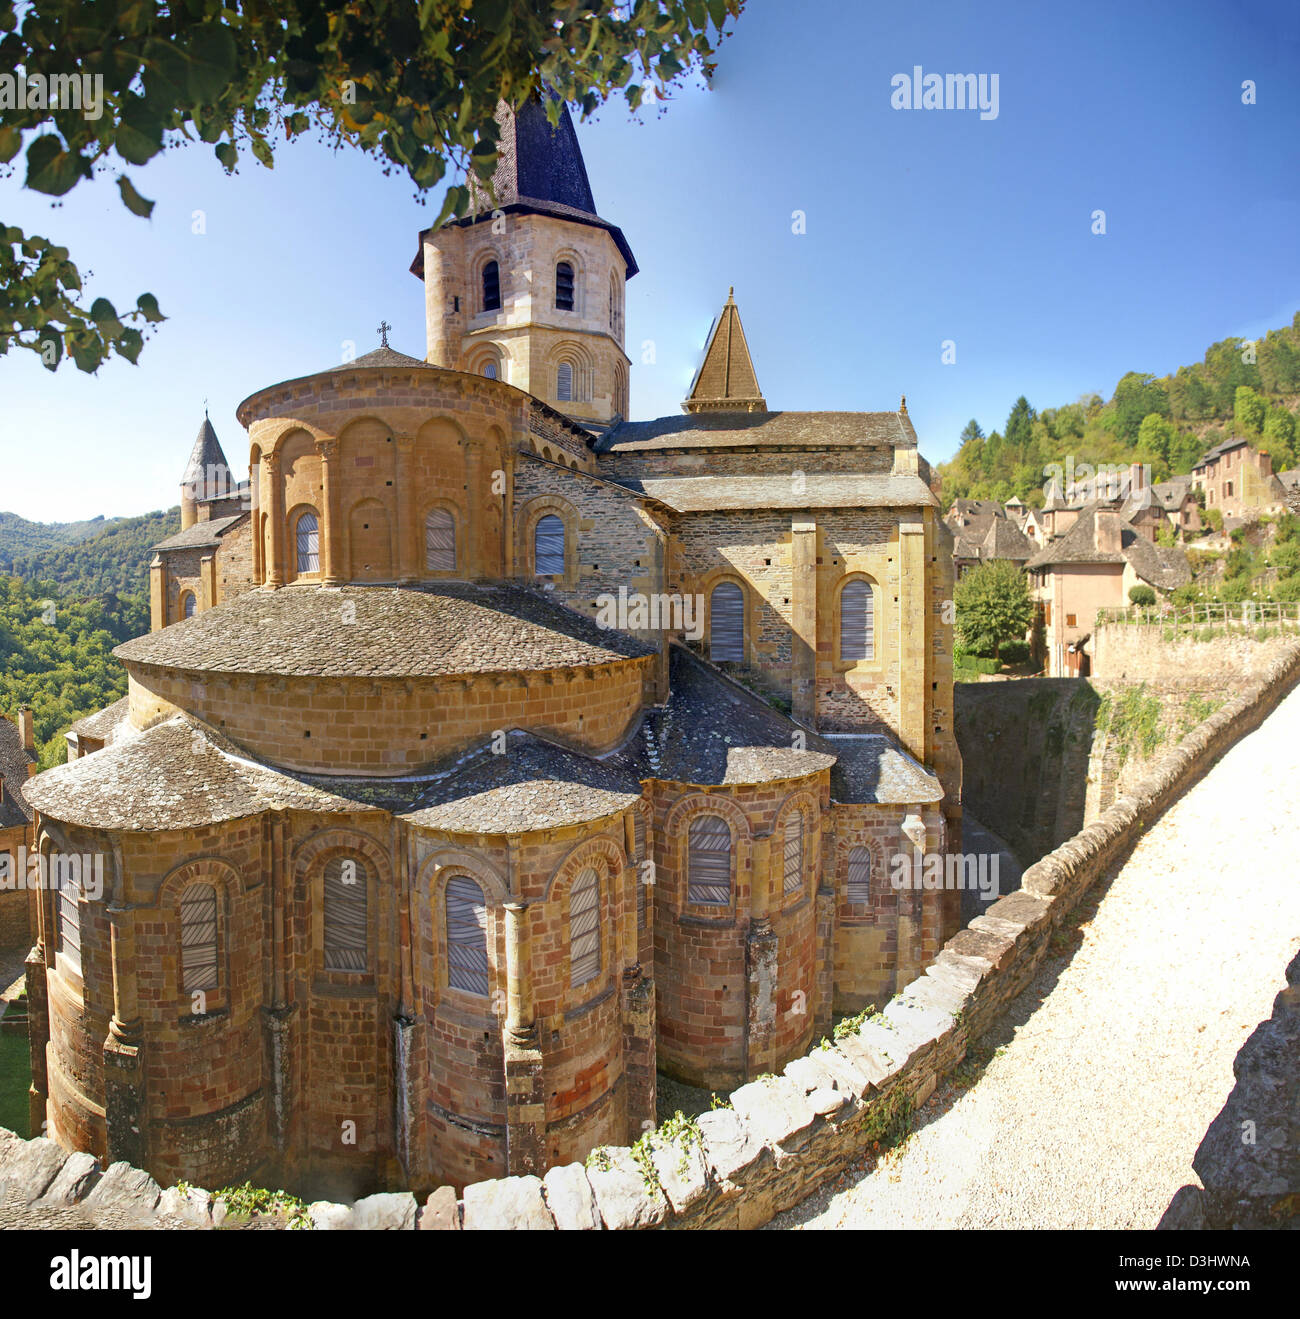 Exterior chapels and turrets from the 13th century, Abbey Church of St. Foy, Conques, France Stock Photo